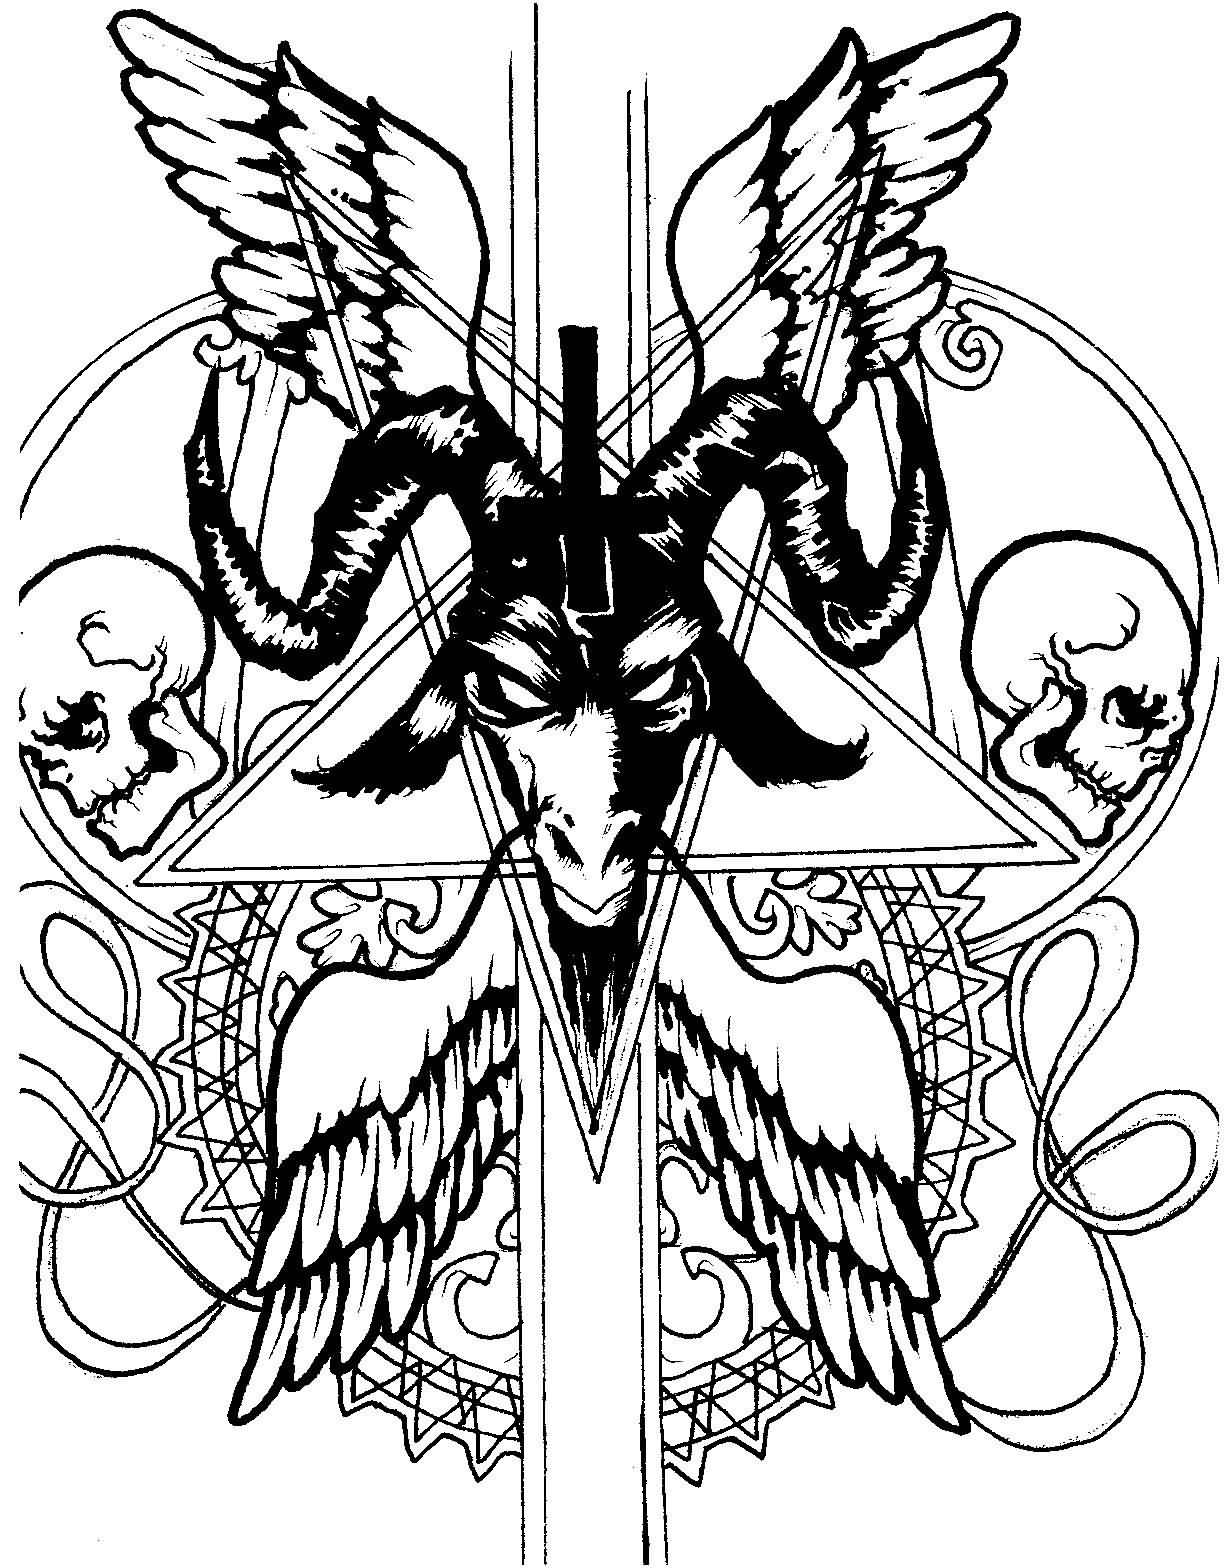 Awesome Satan Tattoo Design By TheWidowMaker